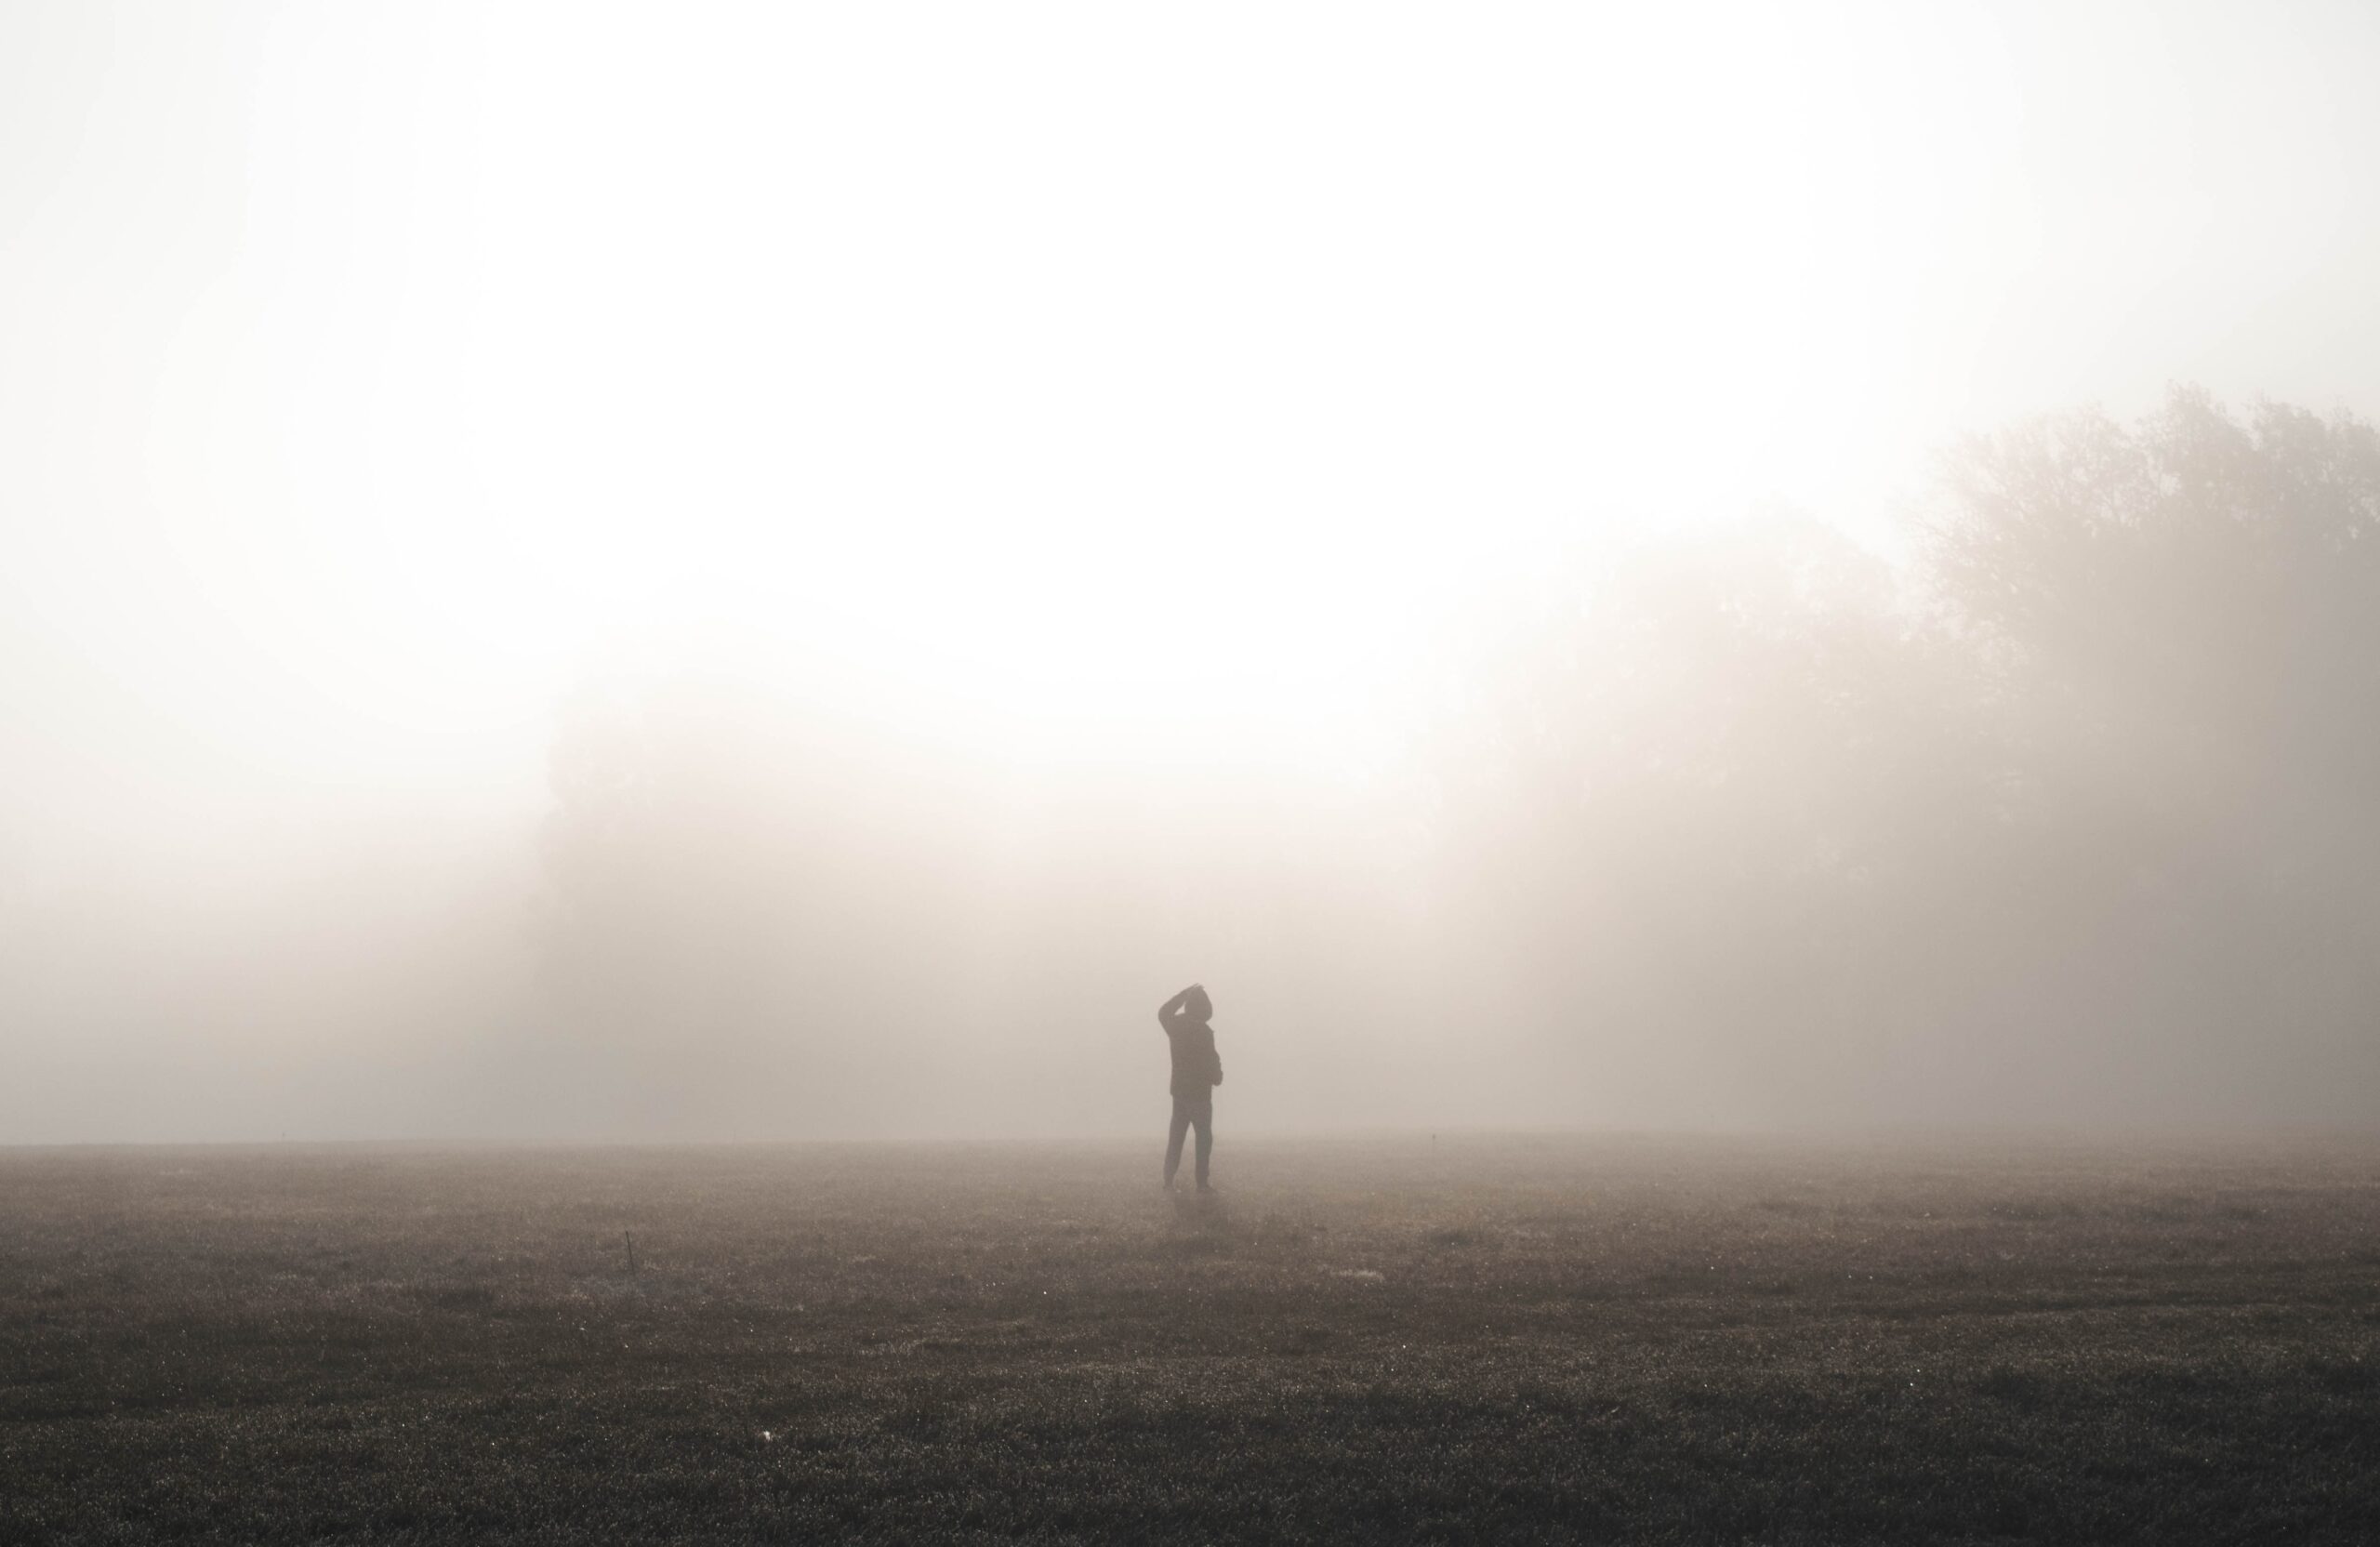 Dark figure in a field with misty foggy air around and trees obscured in the distance.